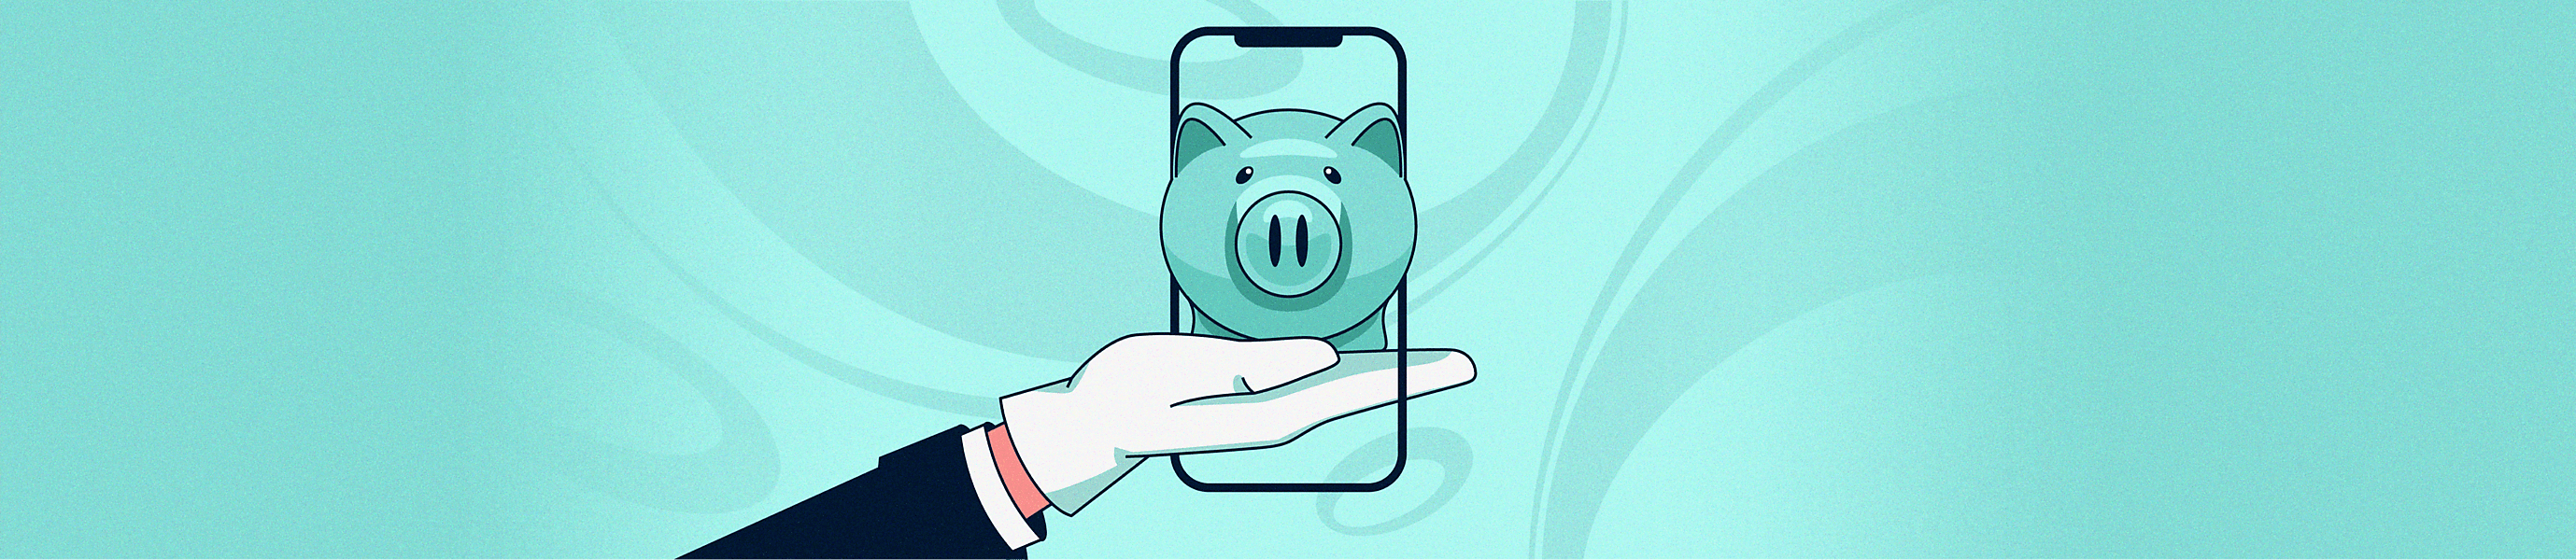 How To Build A Money Management App Like Mint